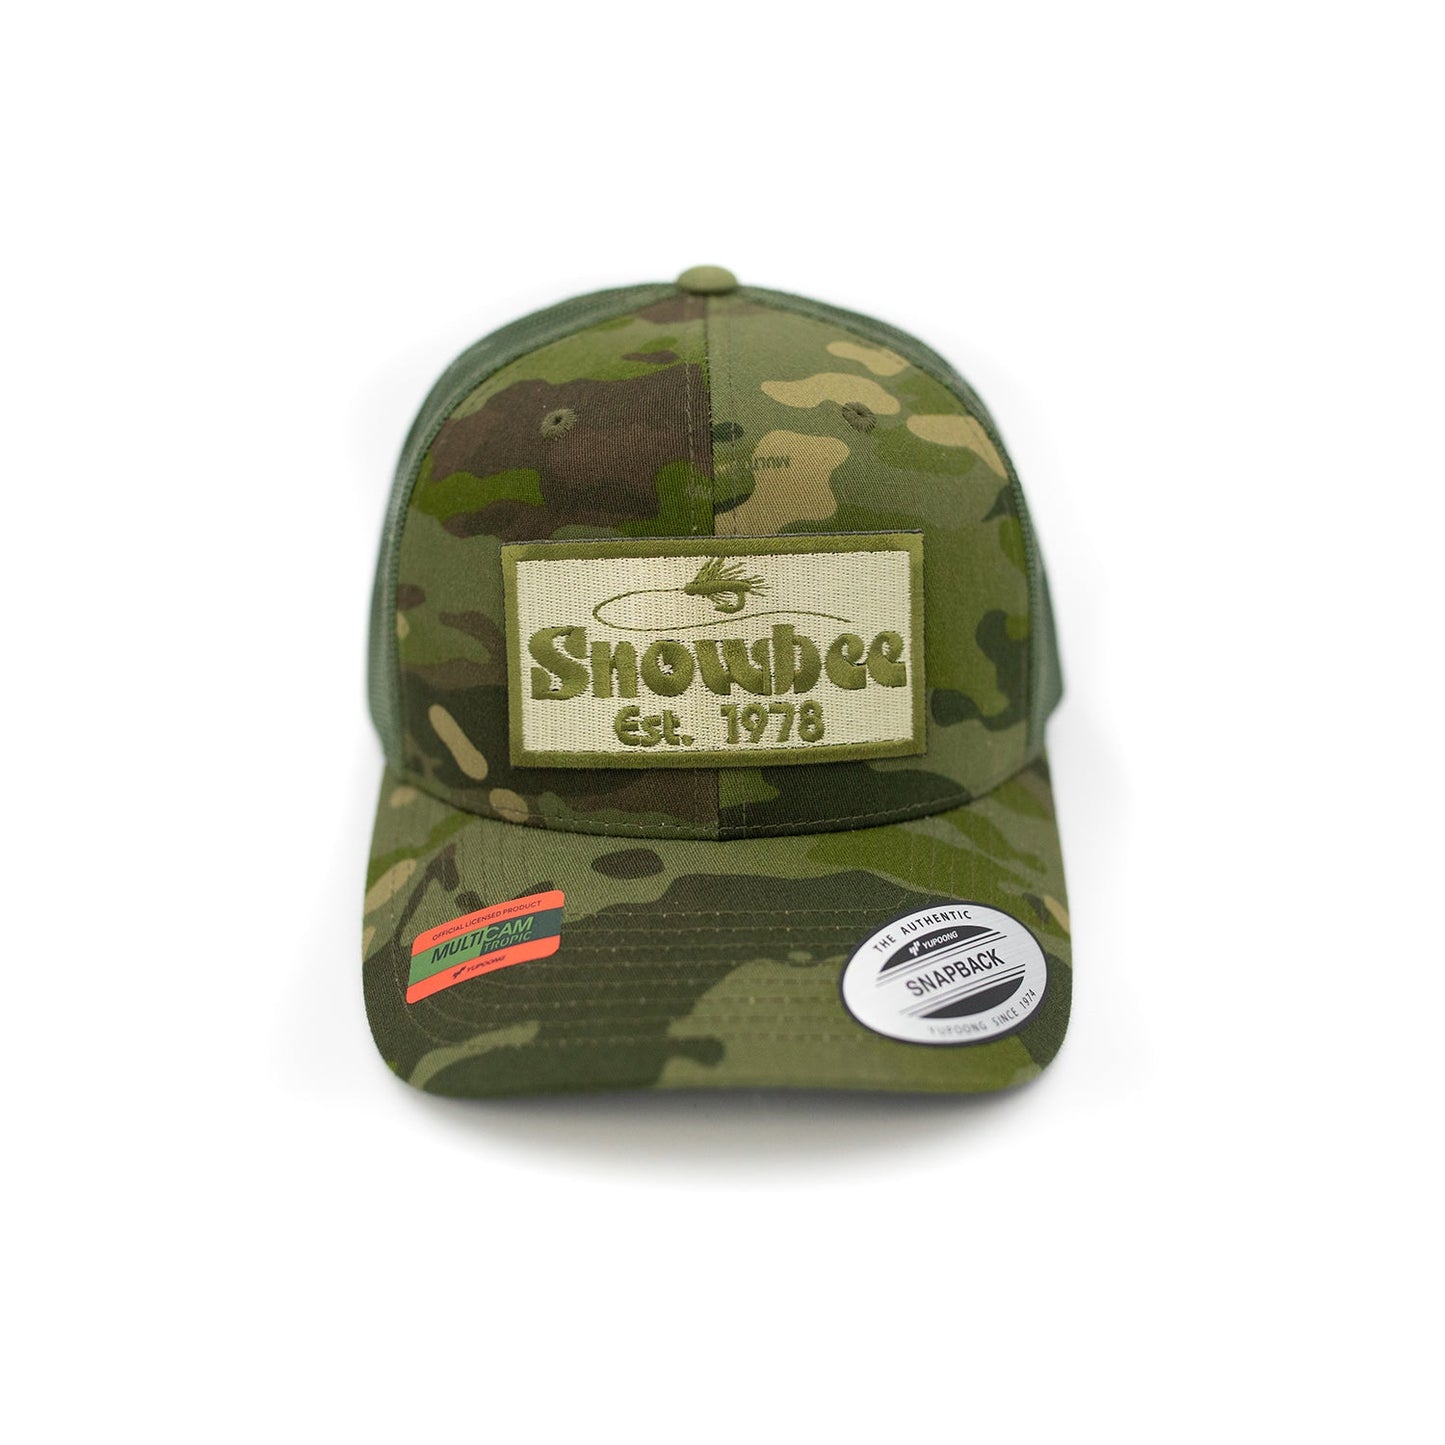 Multicam Green Fly Badge Retro Trucker Hat by Snowbee USA